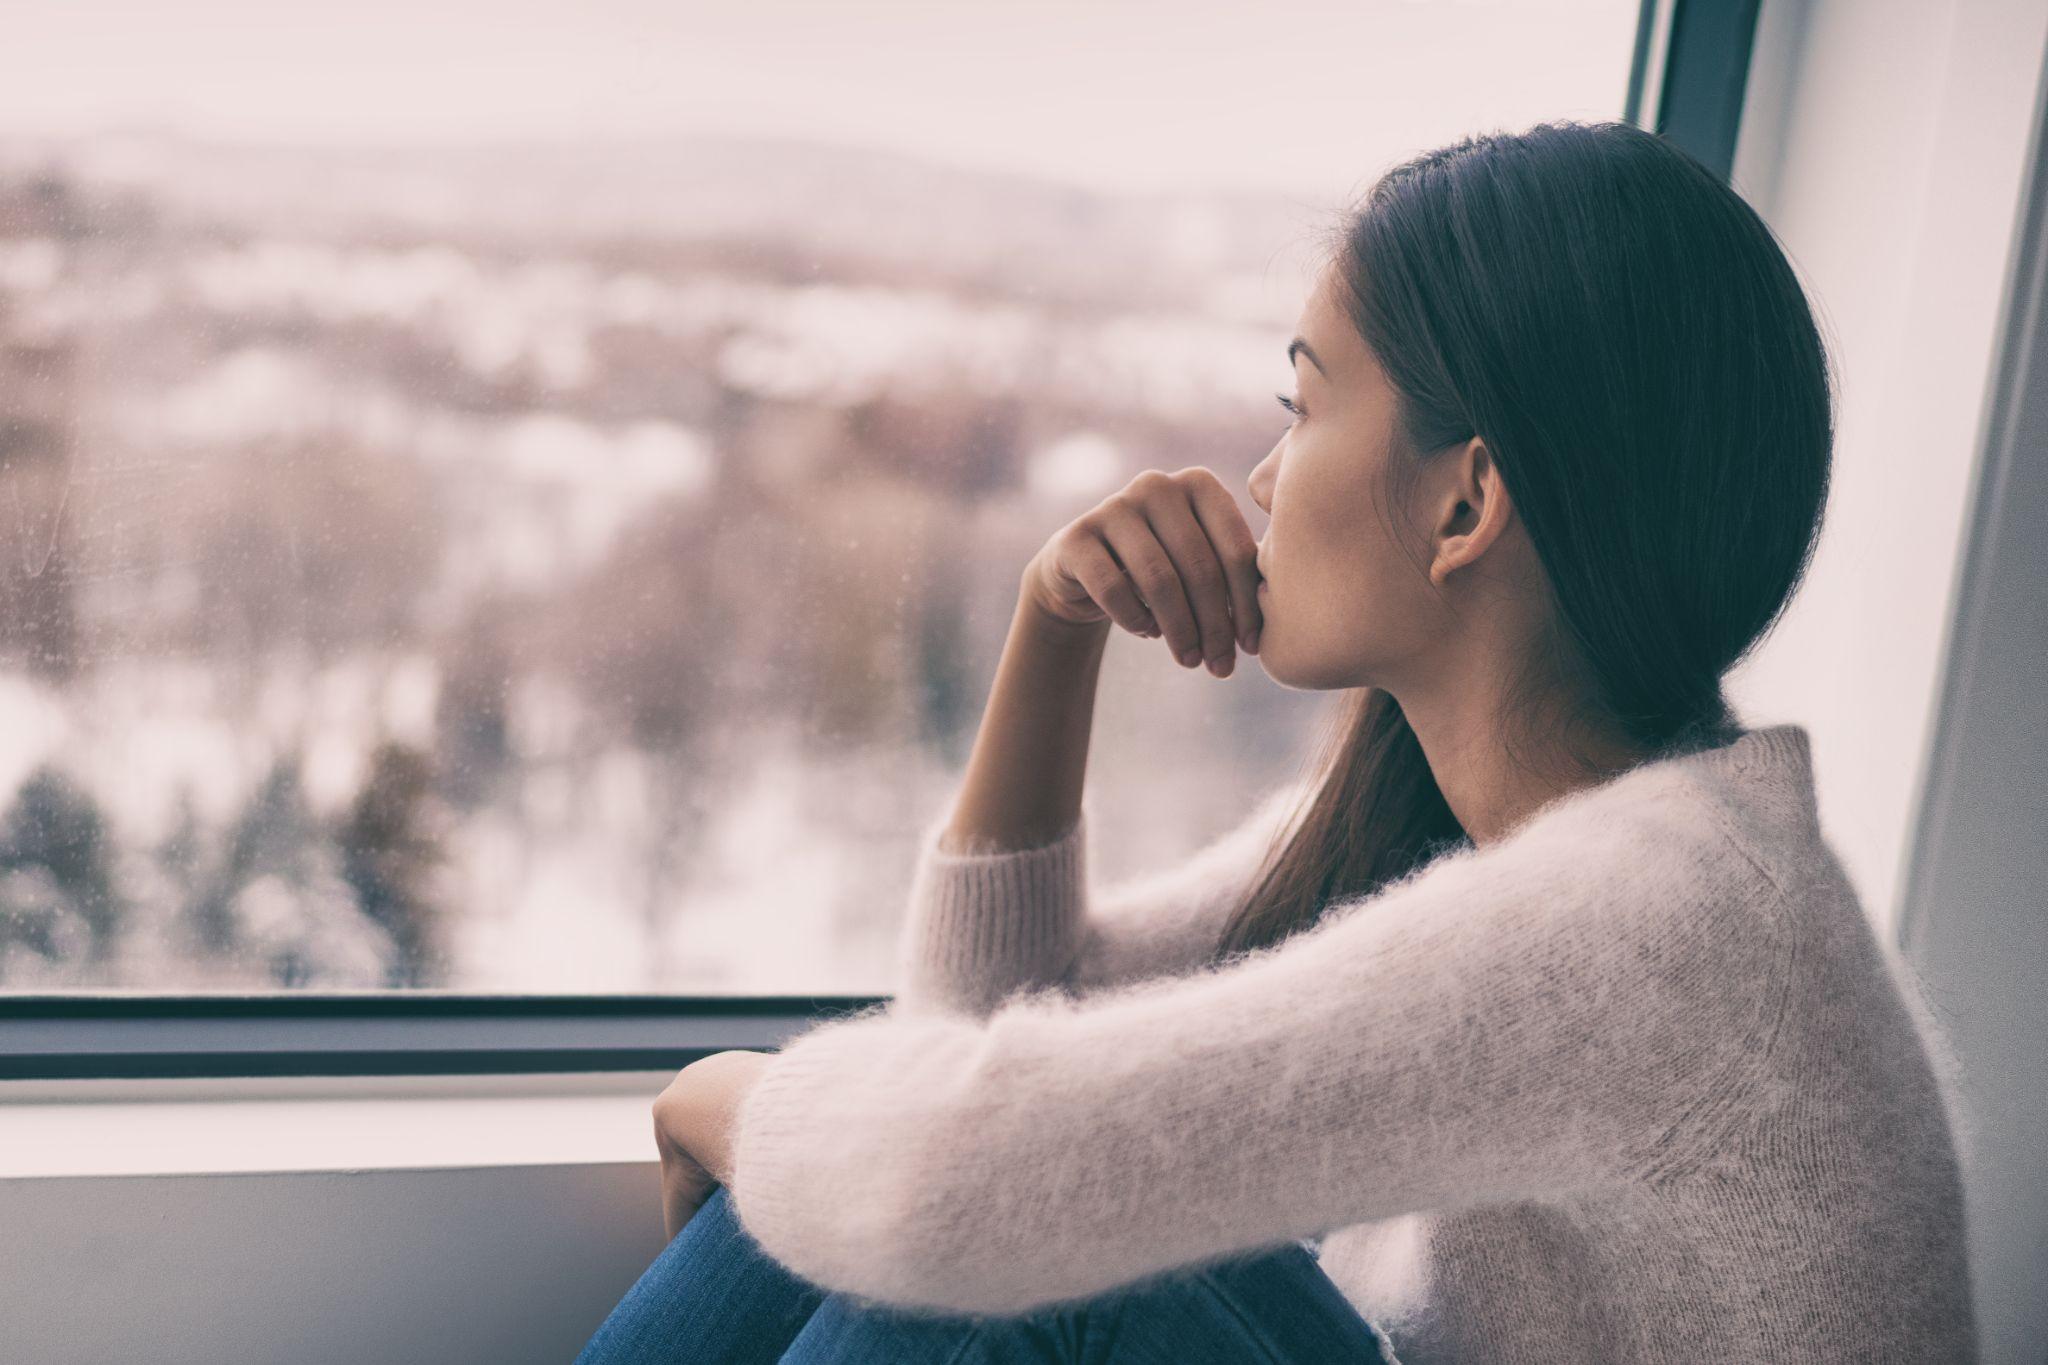 seasonal affective disorder mental health woman sad comtemplative looking out the window alone.